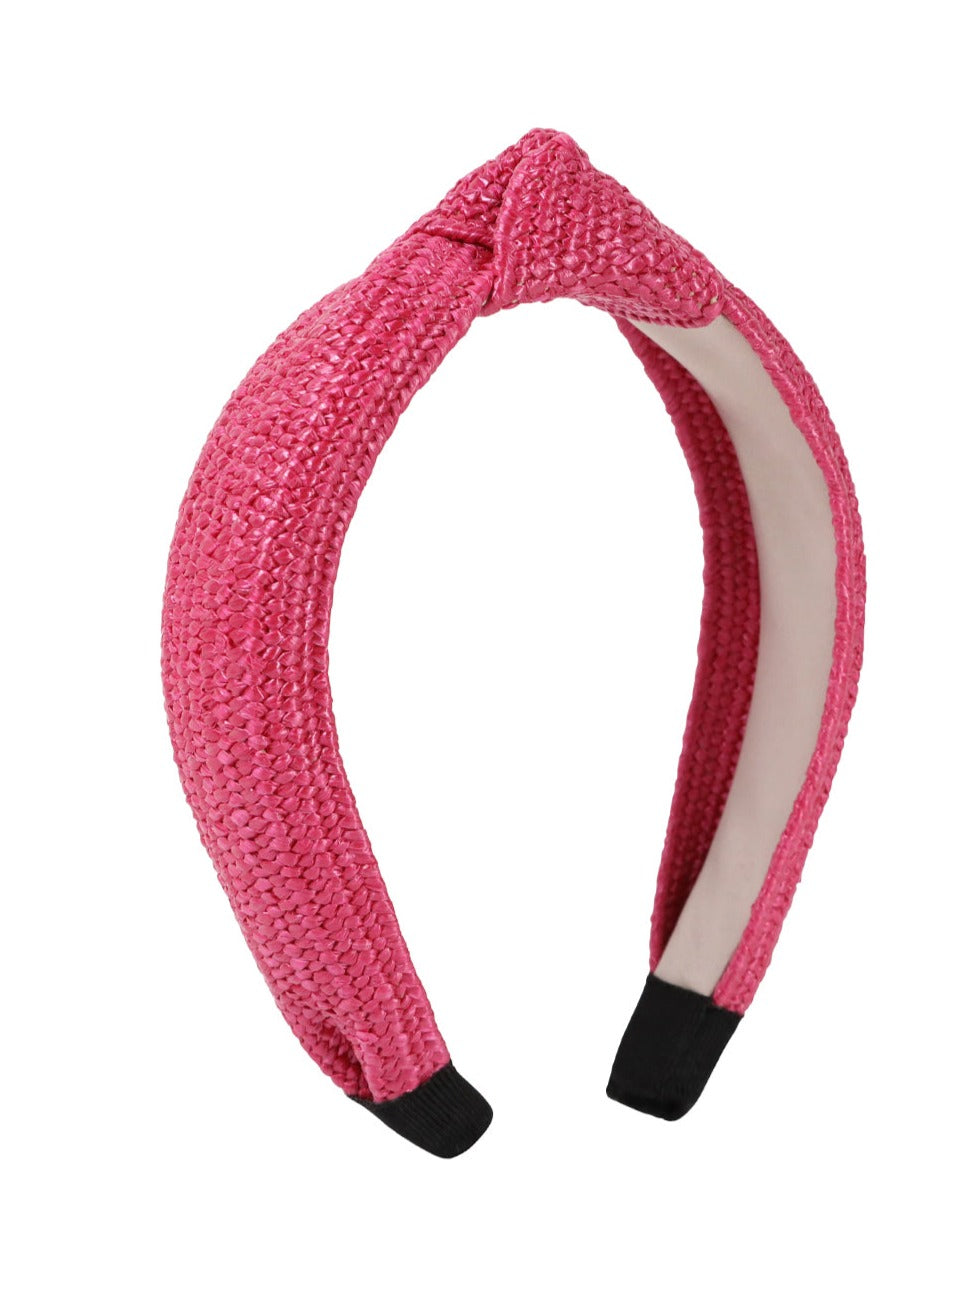 Woven Knot Headband in Pink | Woven | Wedding | Wedding guest | Occasion | Races | Beach | Holiday | Party | Glam | Women's Accessories | Accessory | Hair Accessory